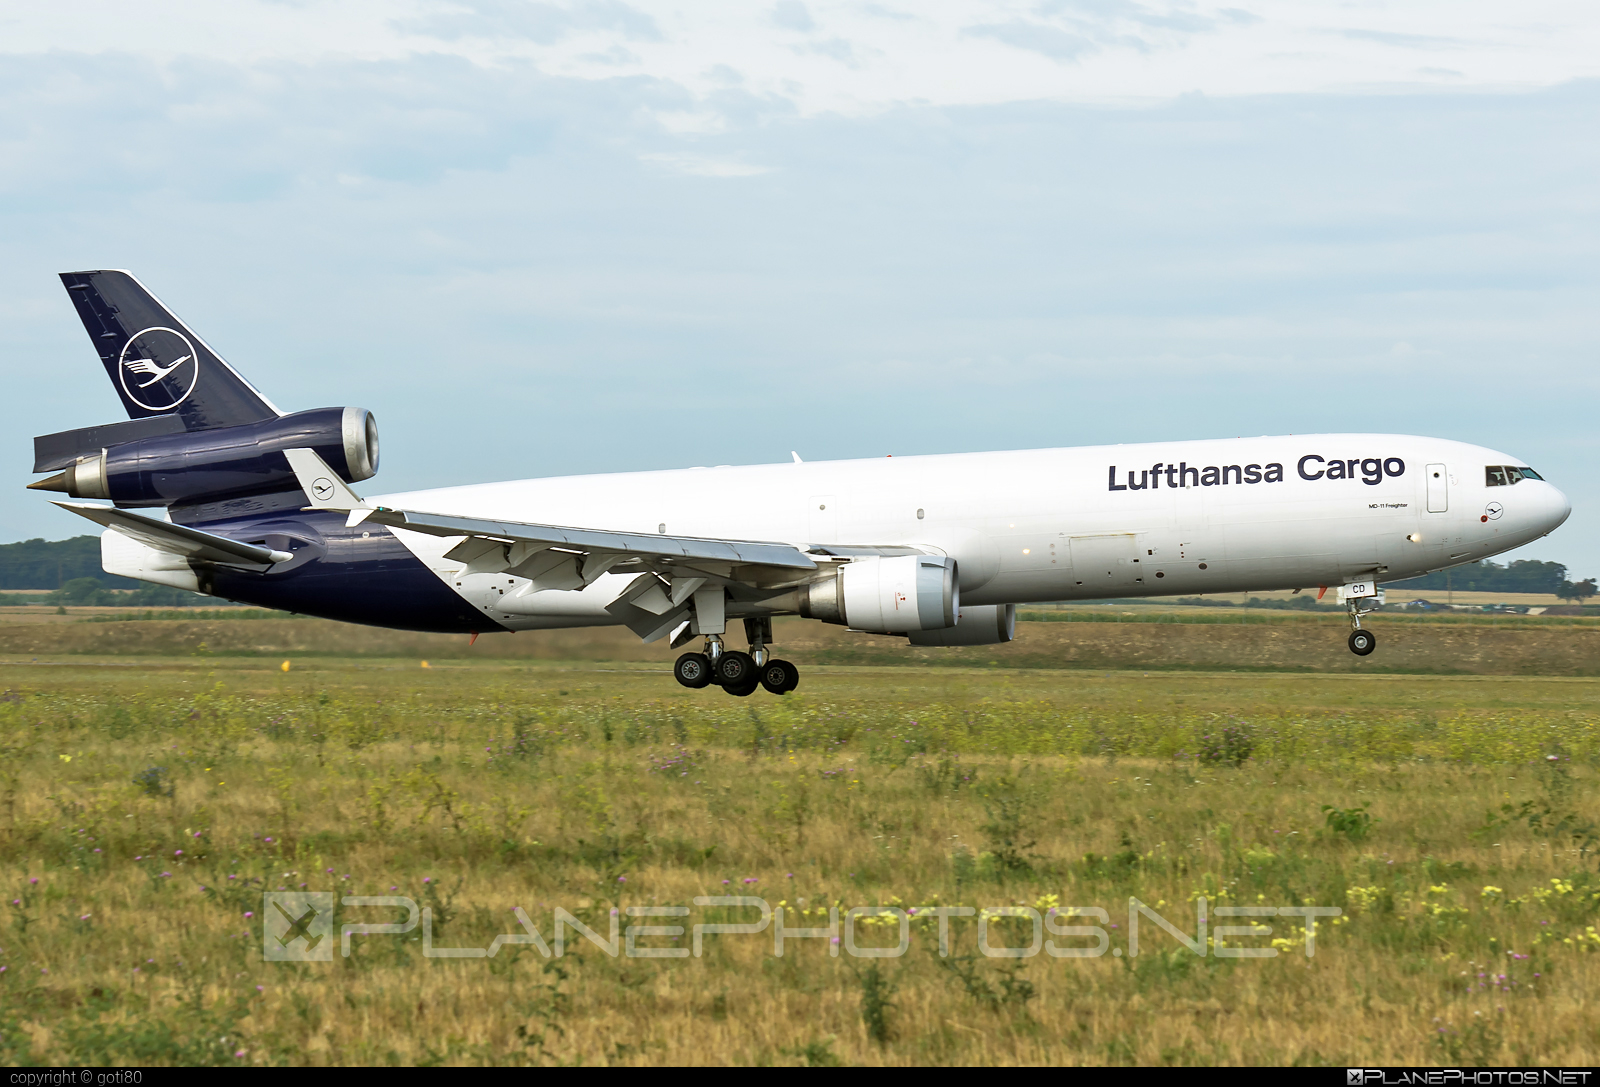 McDonnell Douglas MD-11F - D-ALCD operated by Lufthansa Cargo #lufthansa #lufthansacargo #mcDonnellDouglas #mcdonnelldouglas11 #mcdonnelldouglas11f #mcdonnelldouglasmd11 #mcdonnelldouglasmd11f #md11 #md11f